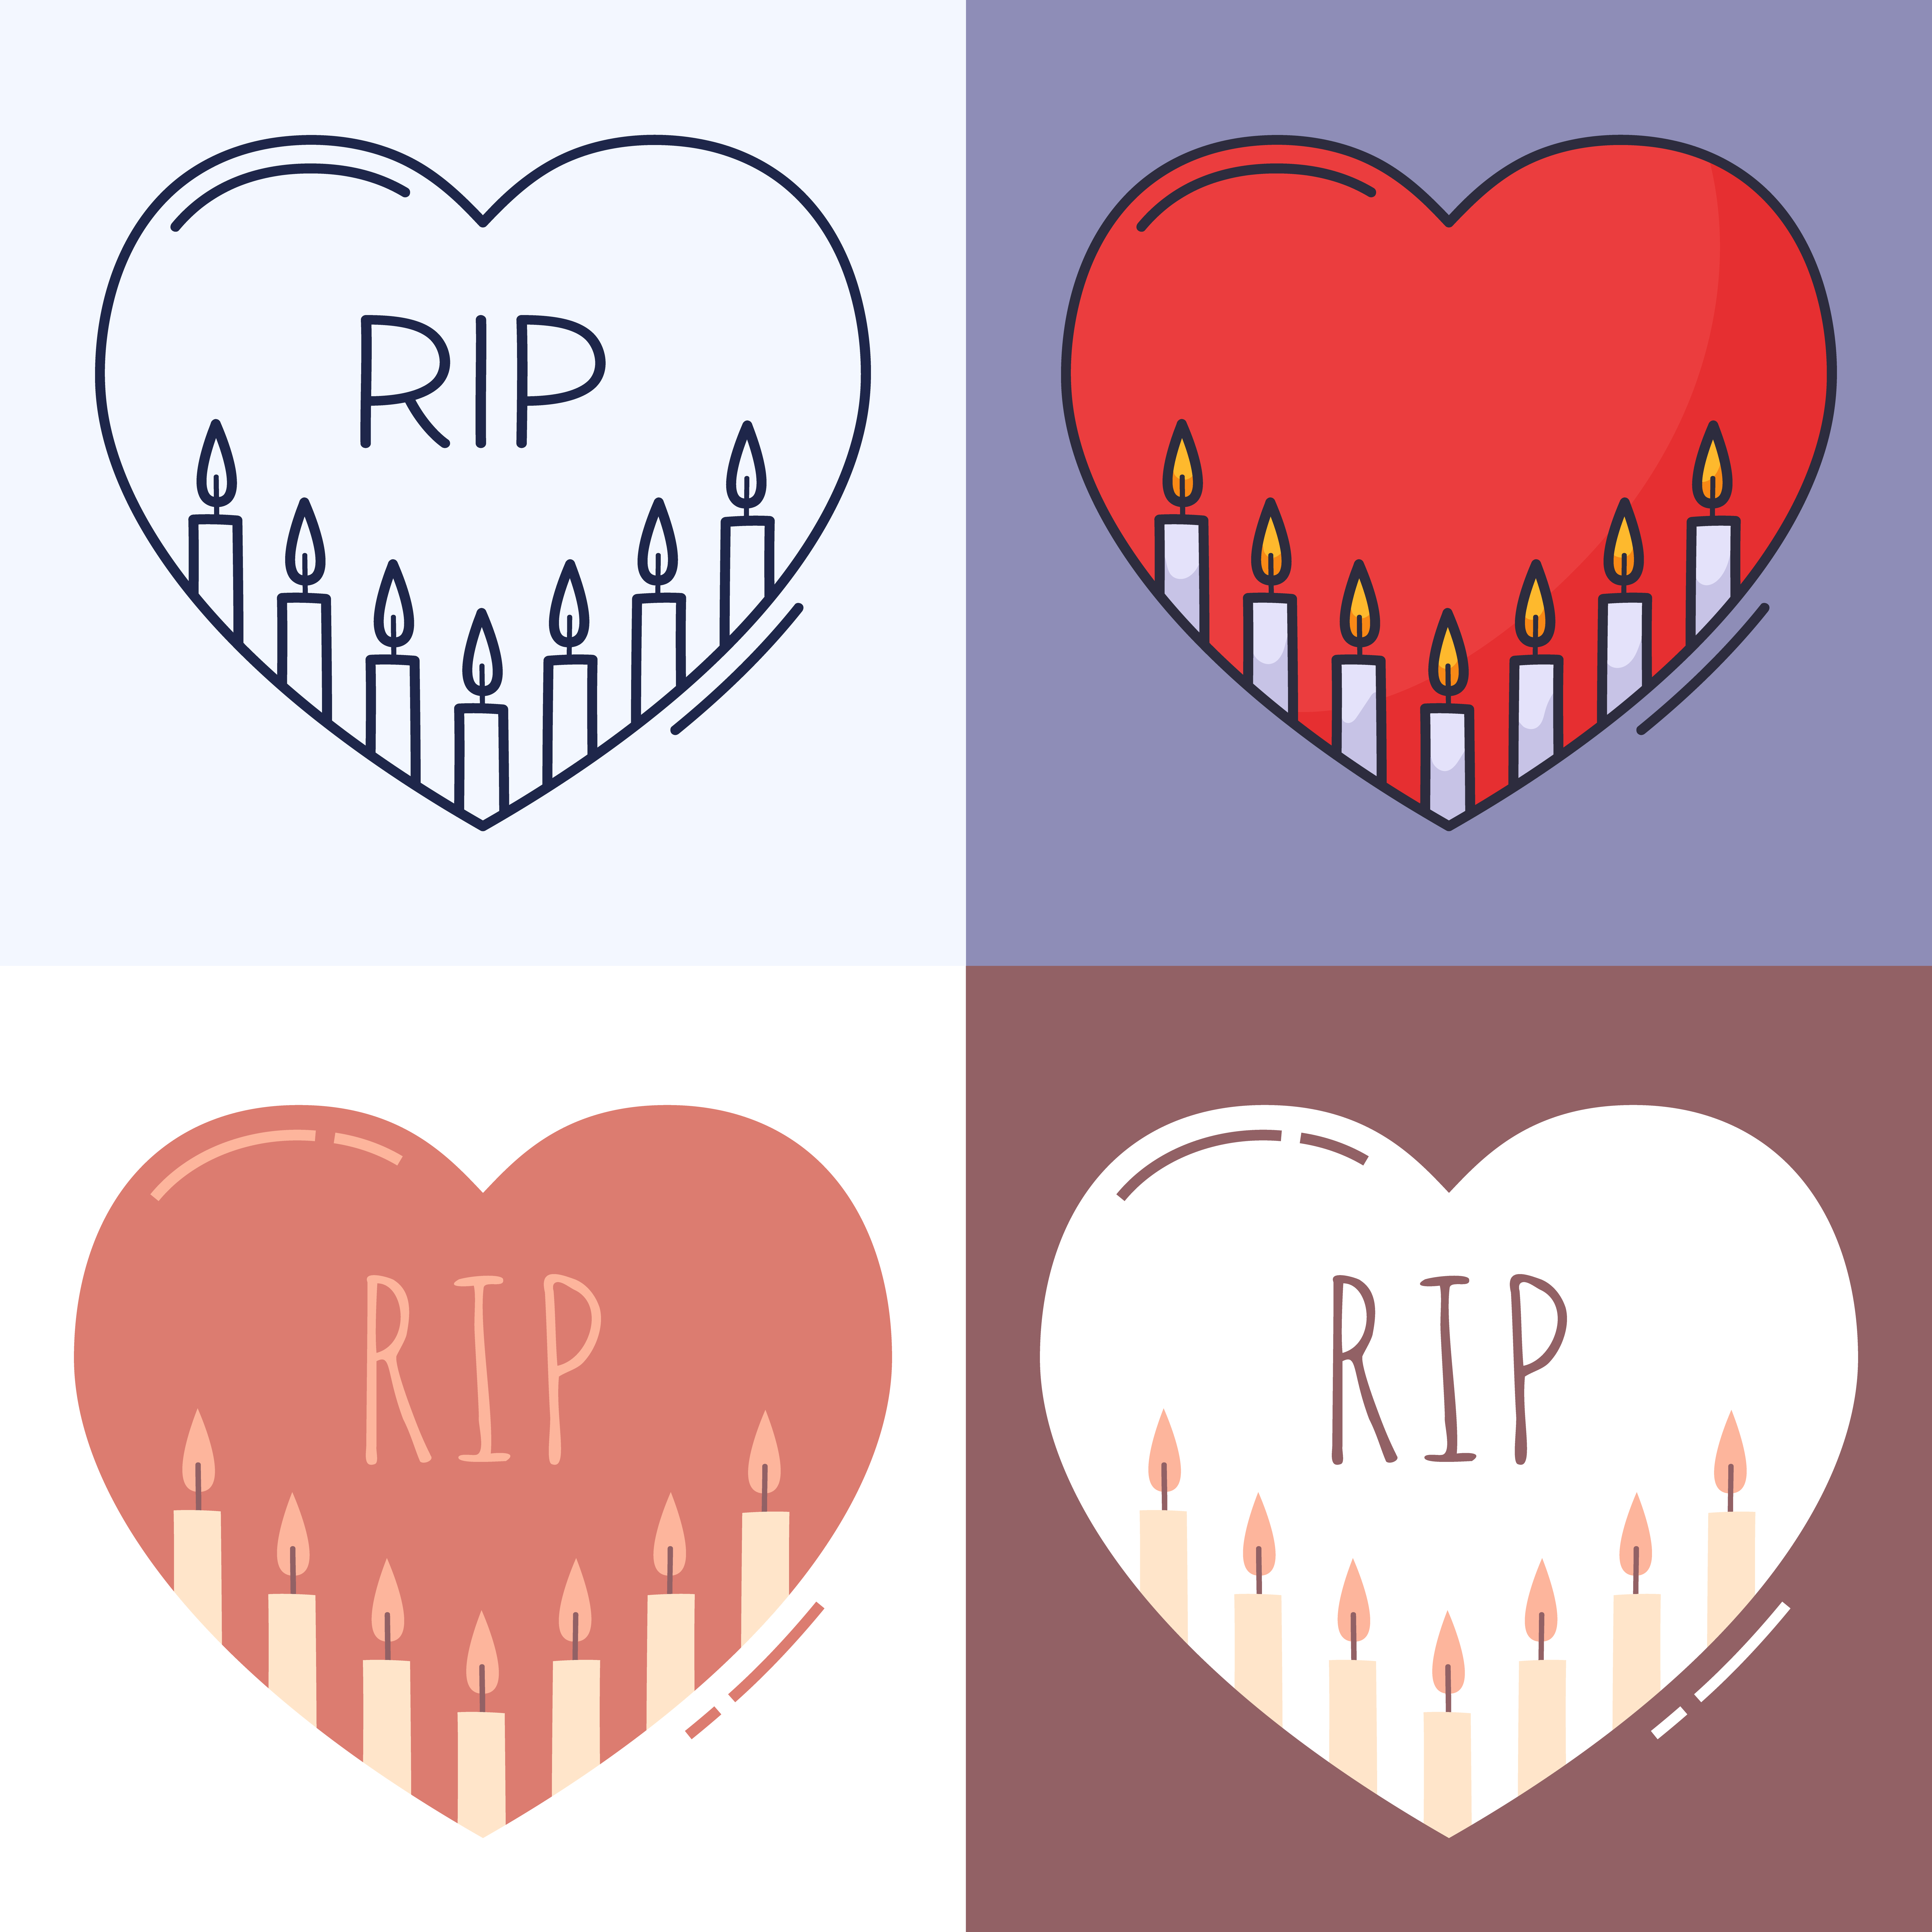 Candles Inside The Heart Outline Icon Set The Concept Of Grief Loss Death Vector Illustration Hand Drawn In Doodle Style Download Free Vectors Clipart Graphics Vector Art